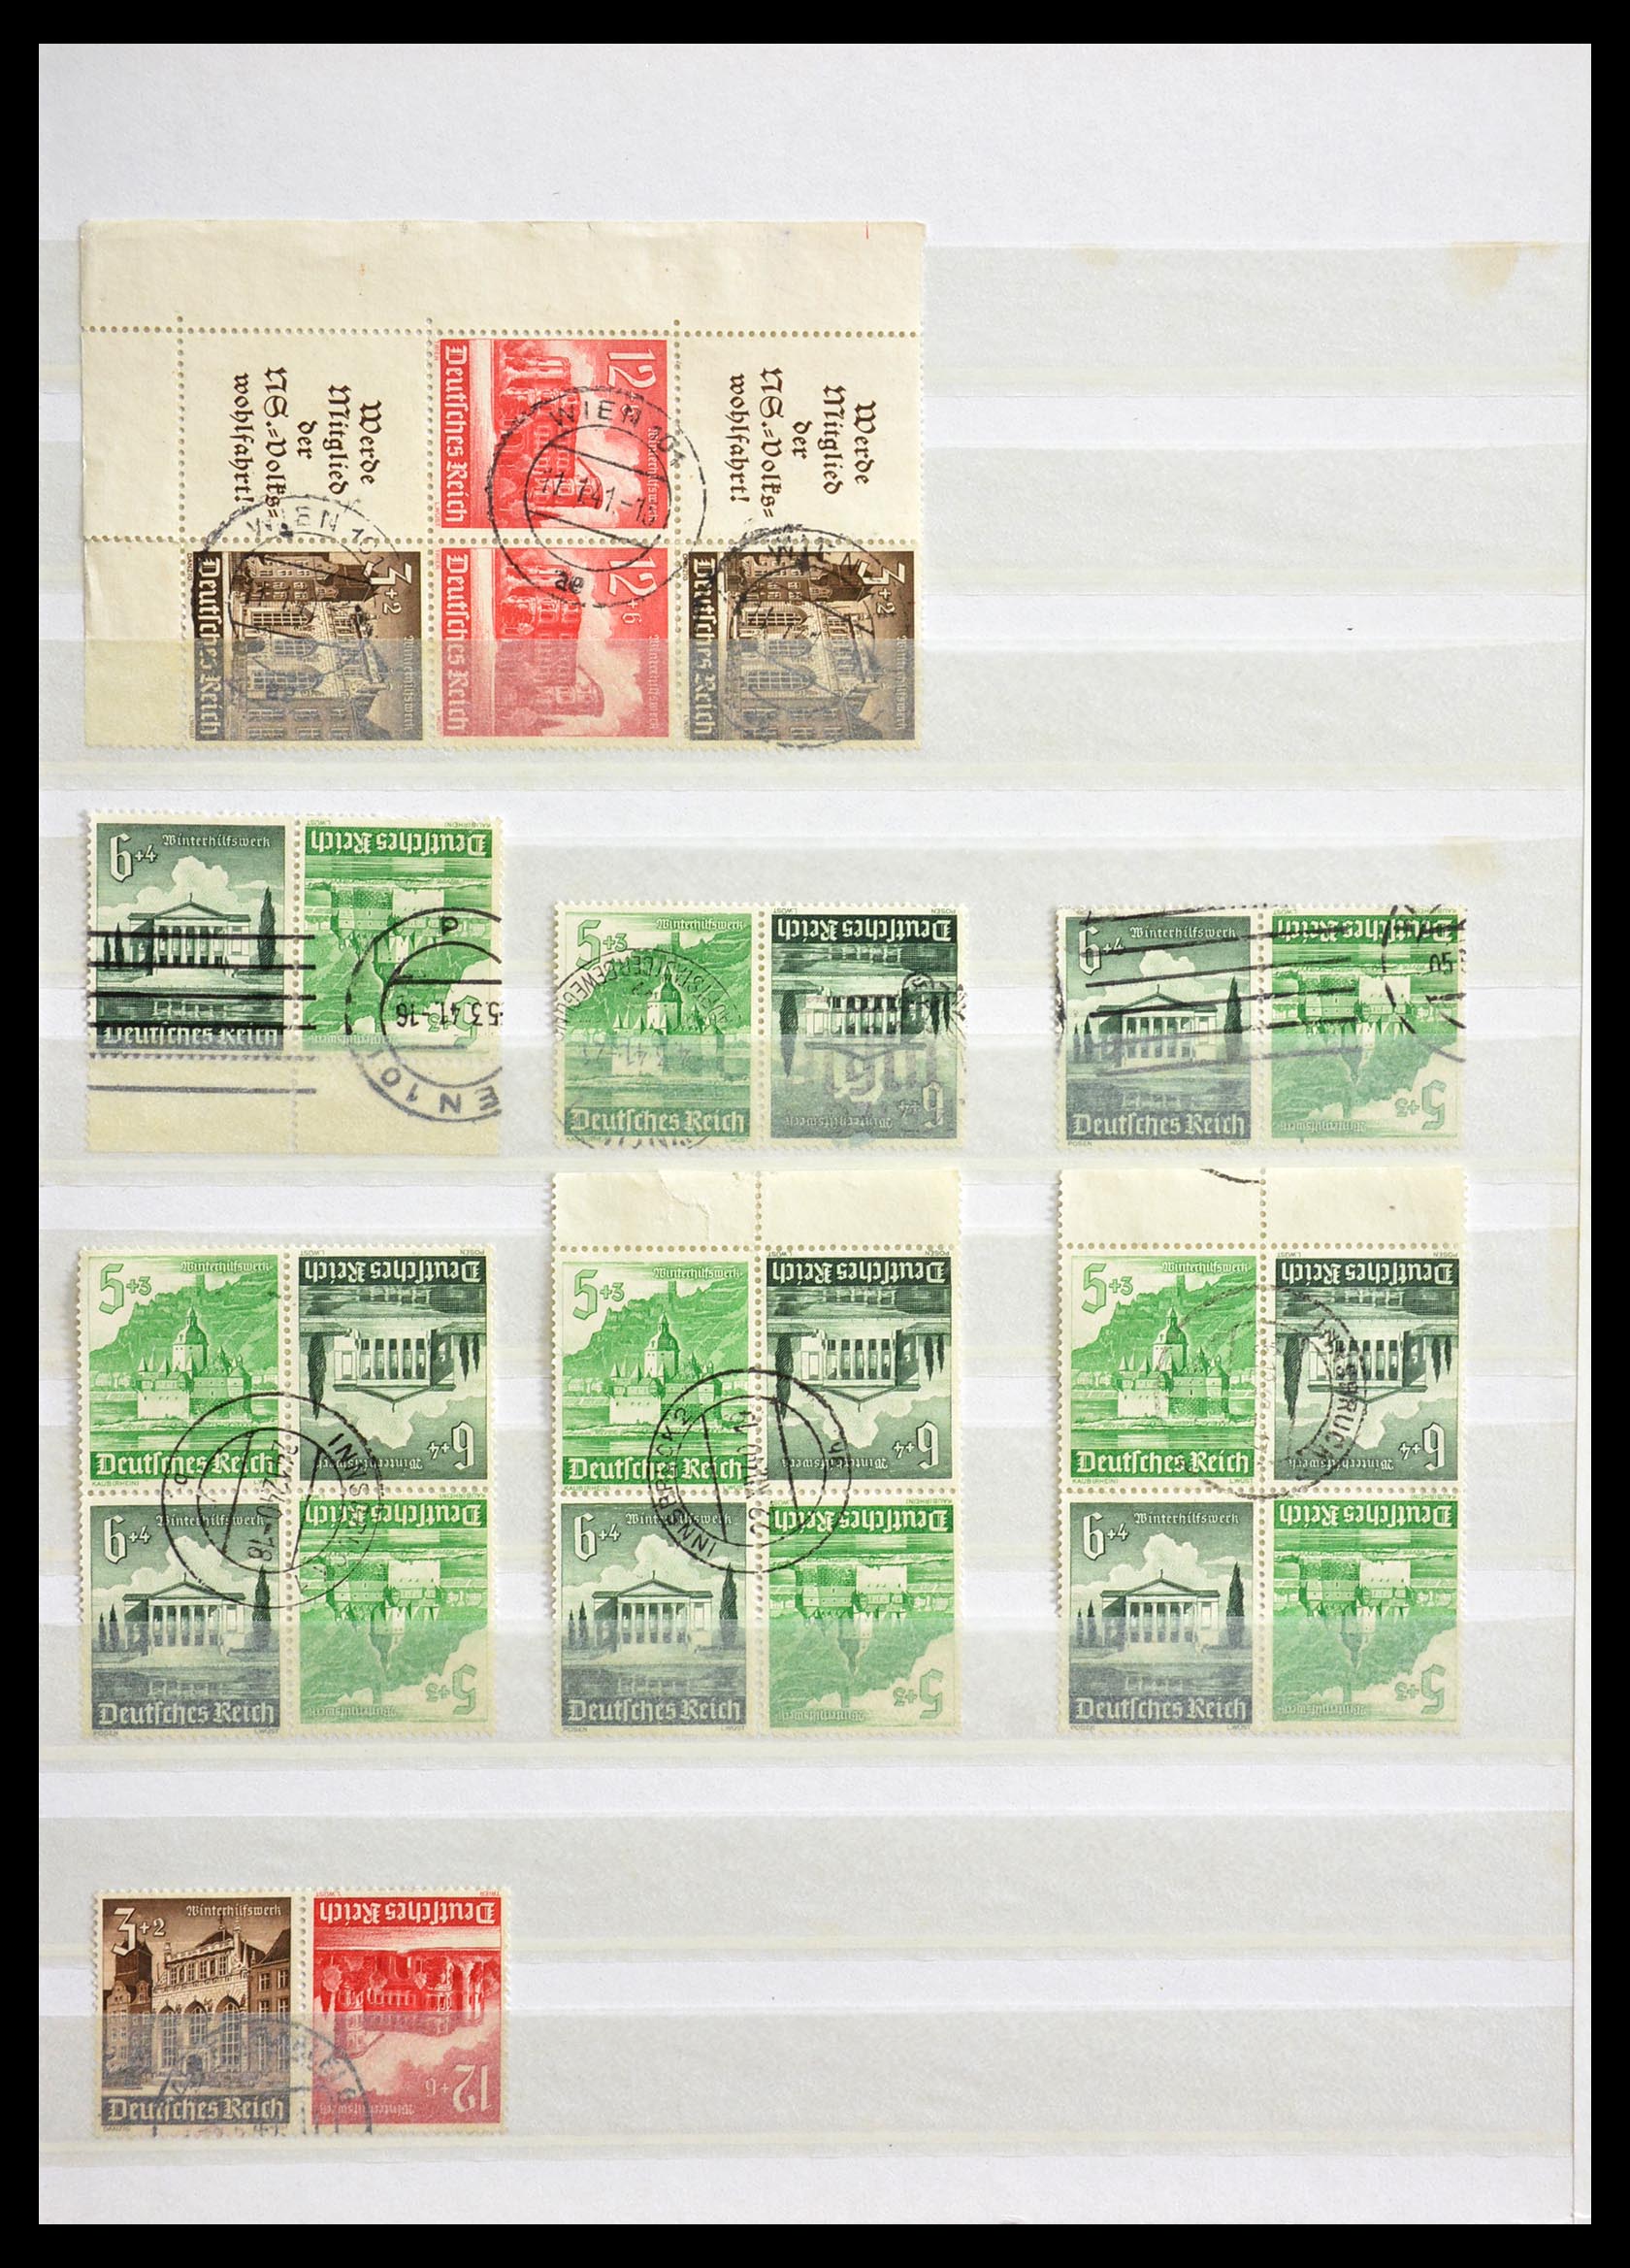 29315 019 - 29315 German Reich combinations cancelled.